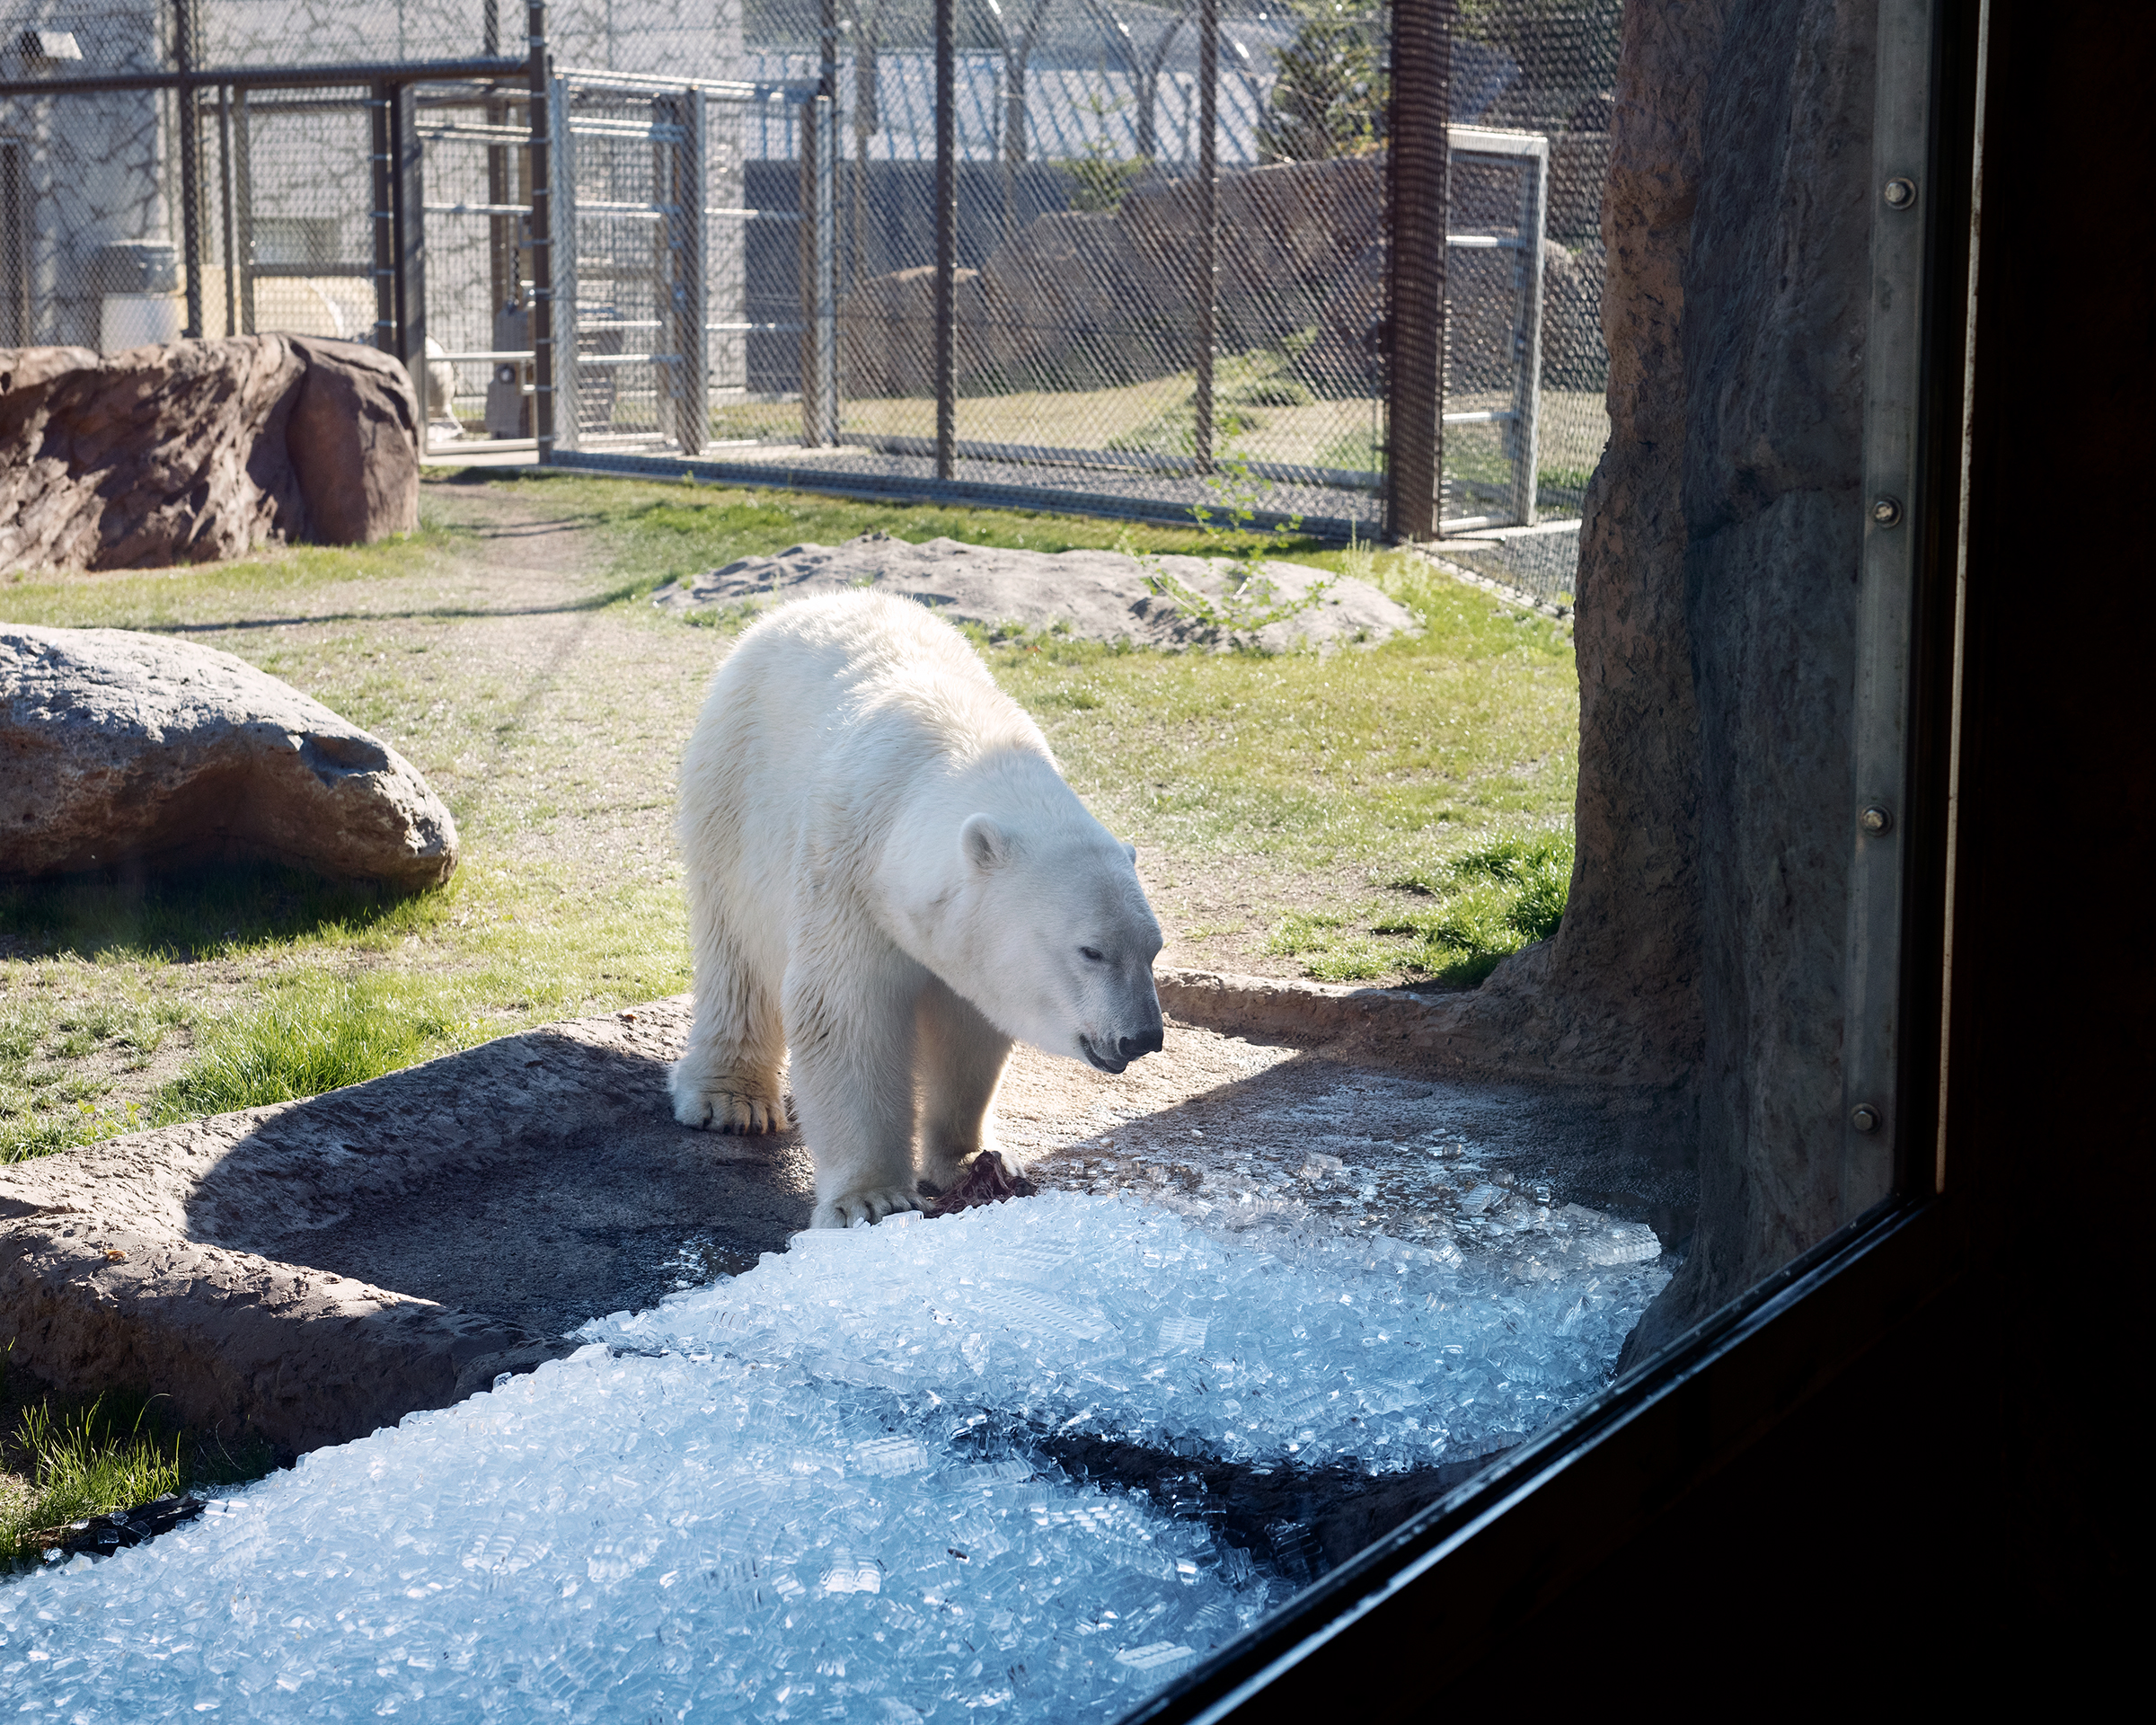 Nora, a polar bear, is seen in the Polar Bear Passage exhibit at the Oregon Zoo in Portland, on June 28.